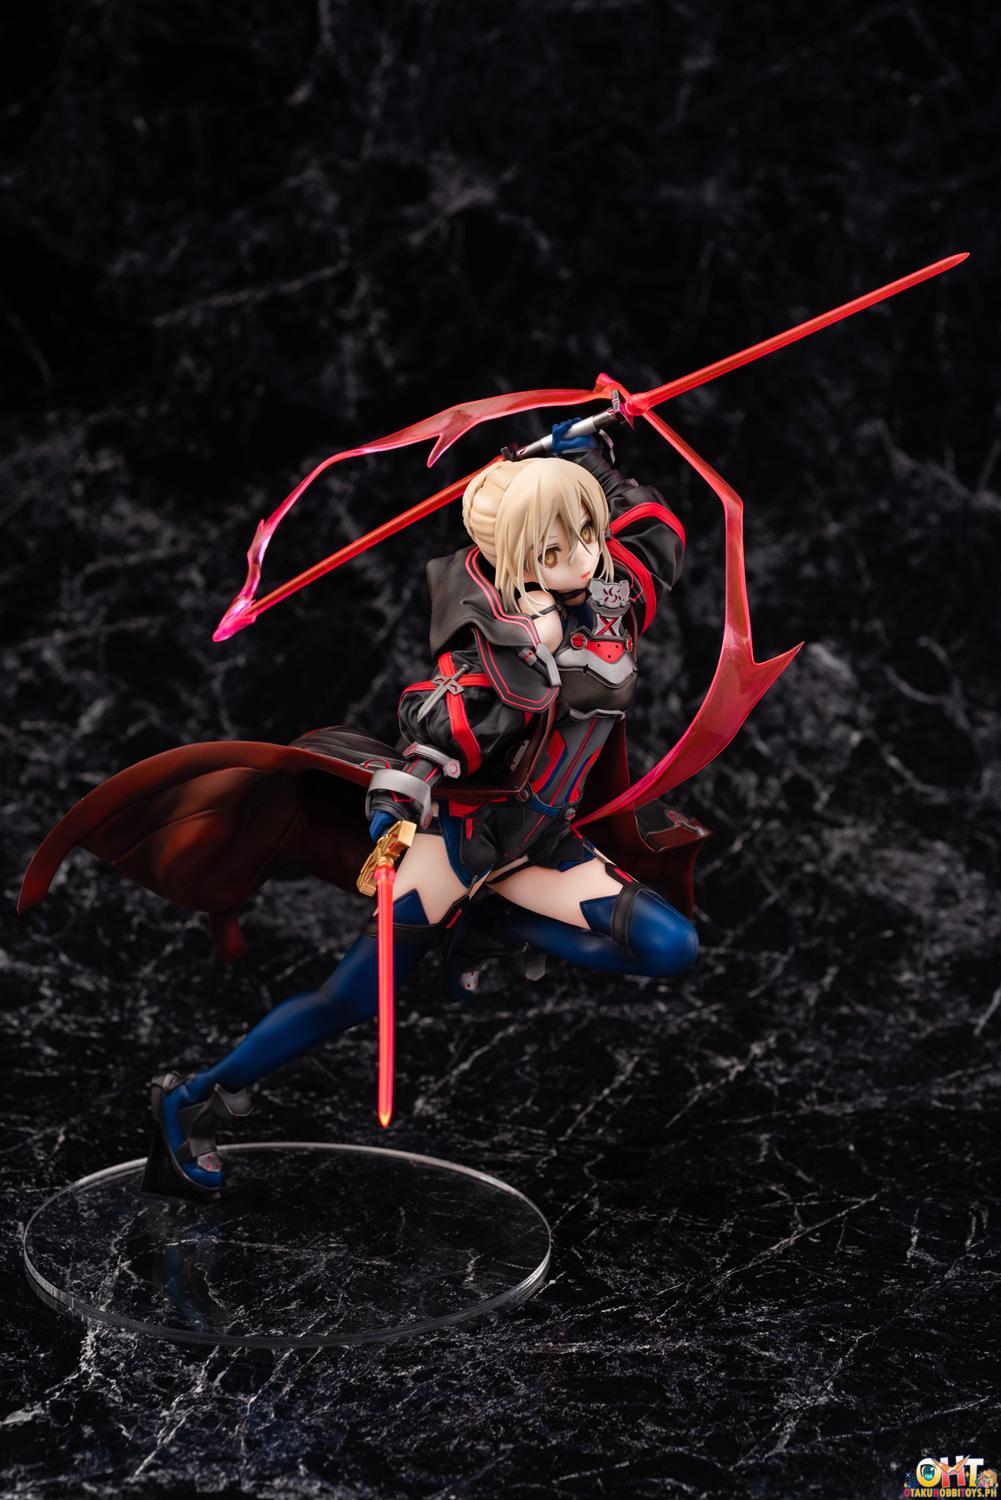 [REISSUE] Funny Knights Fate/Grand Order 1/7 Mysterious Heroine X Alter